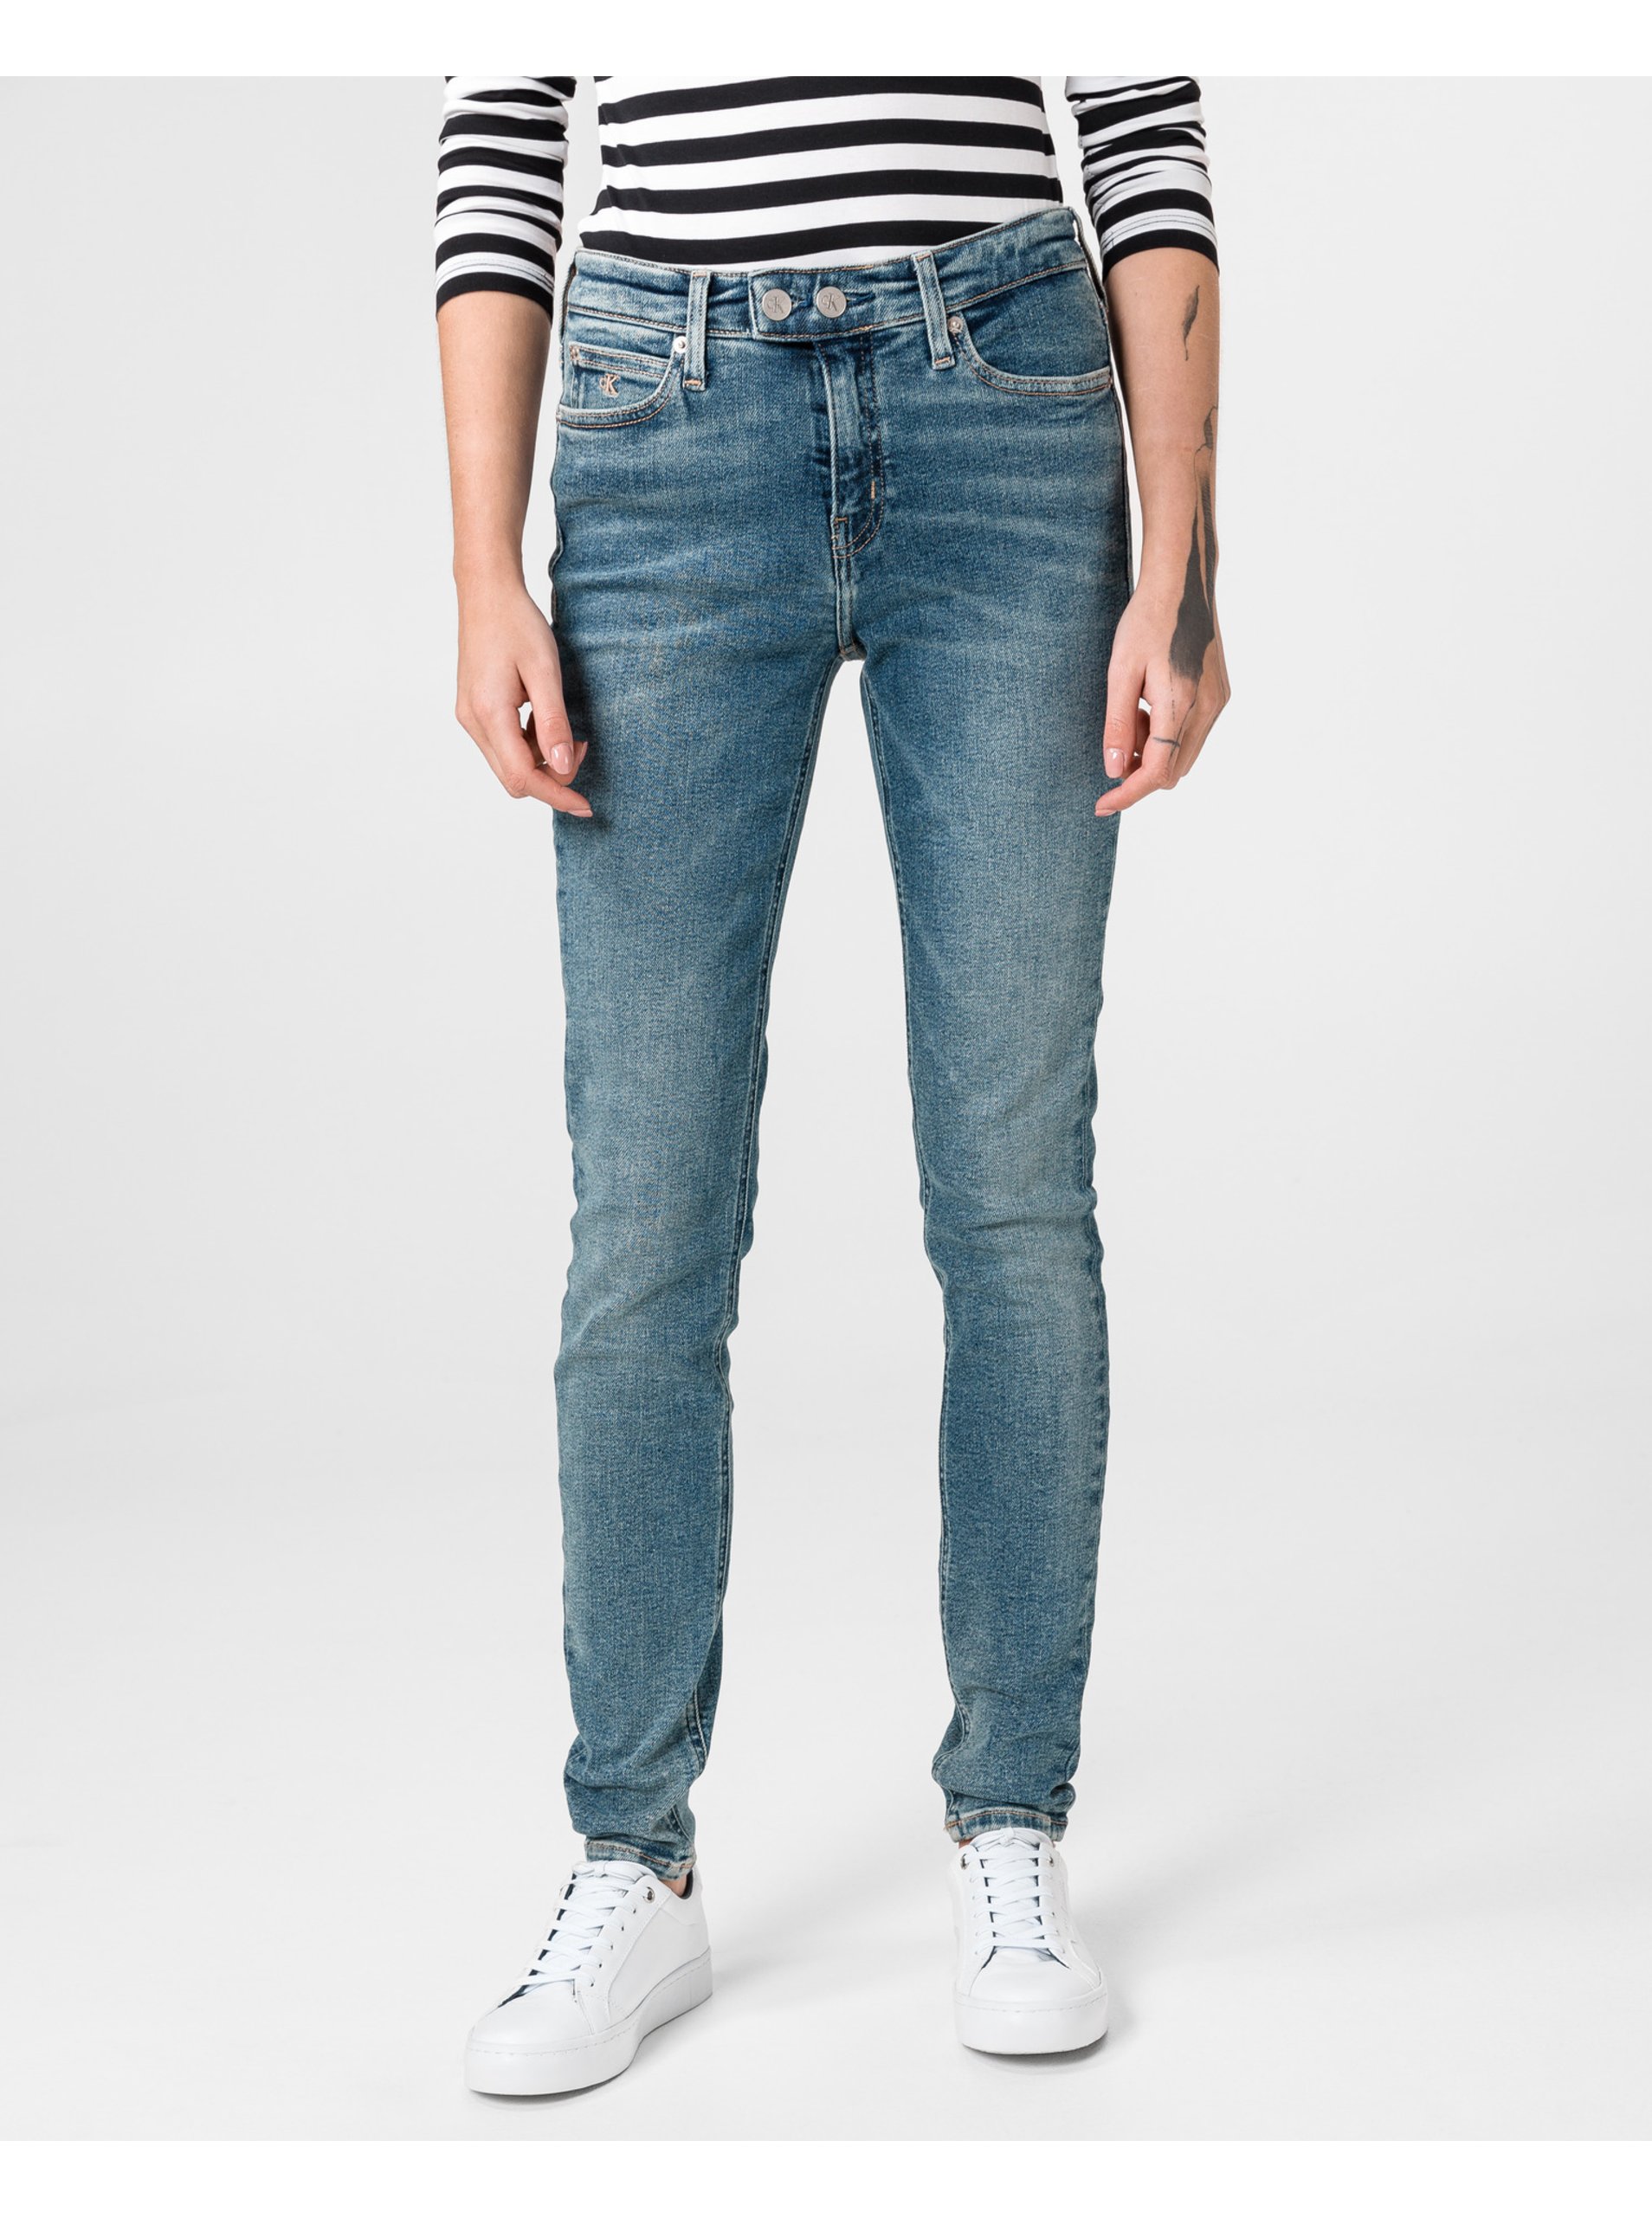 Lacno Rifle 011 Mid Rise Skinny Jeans Calvin Klein Jeans